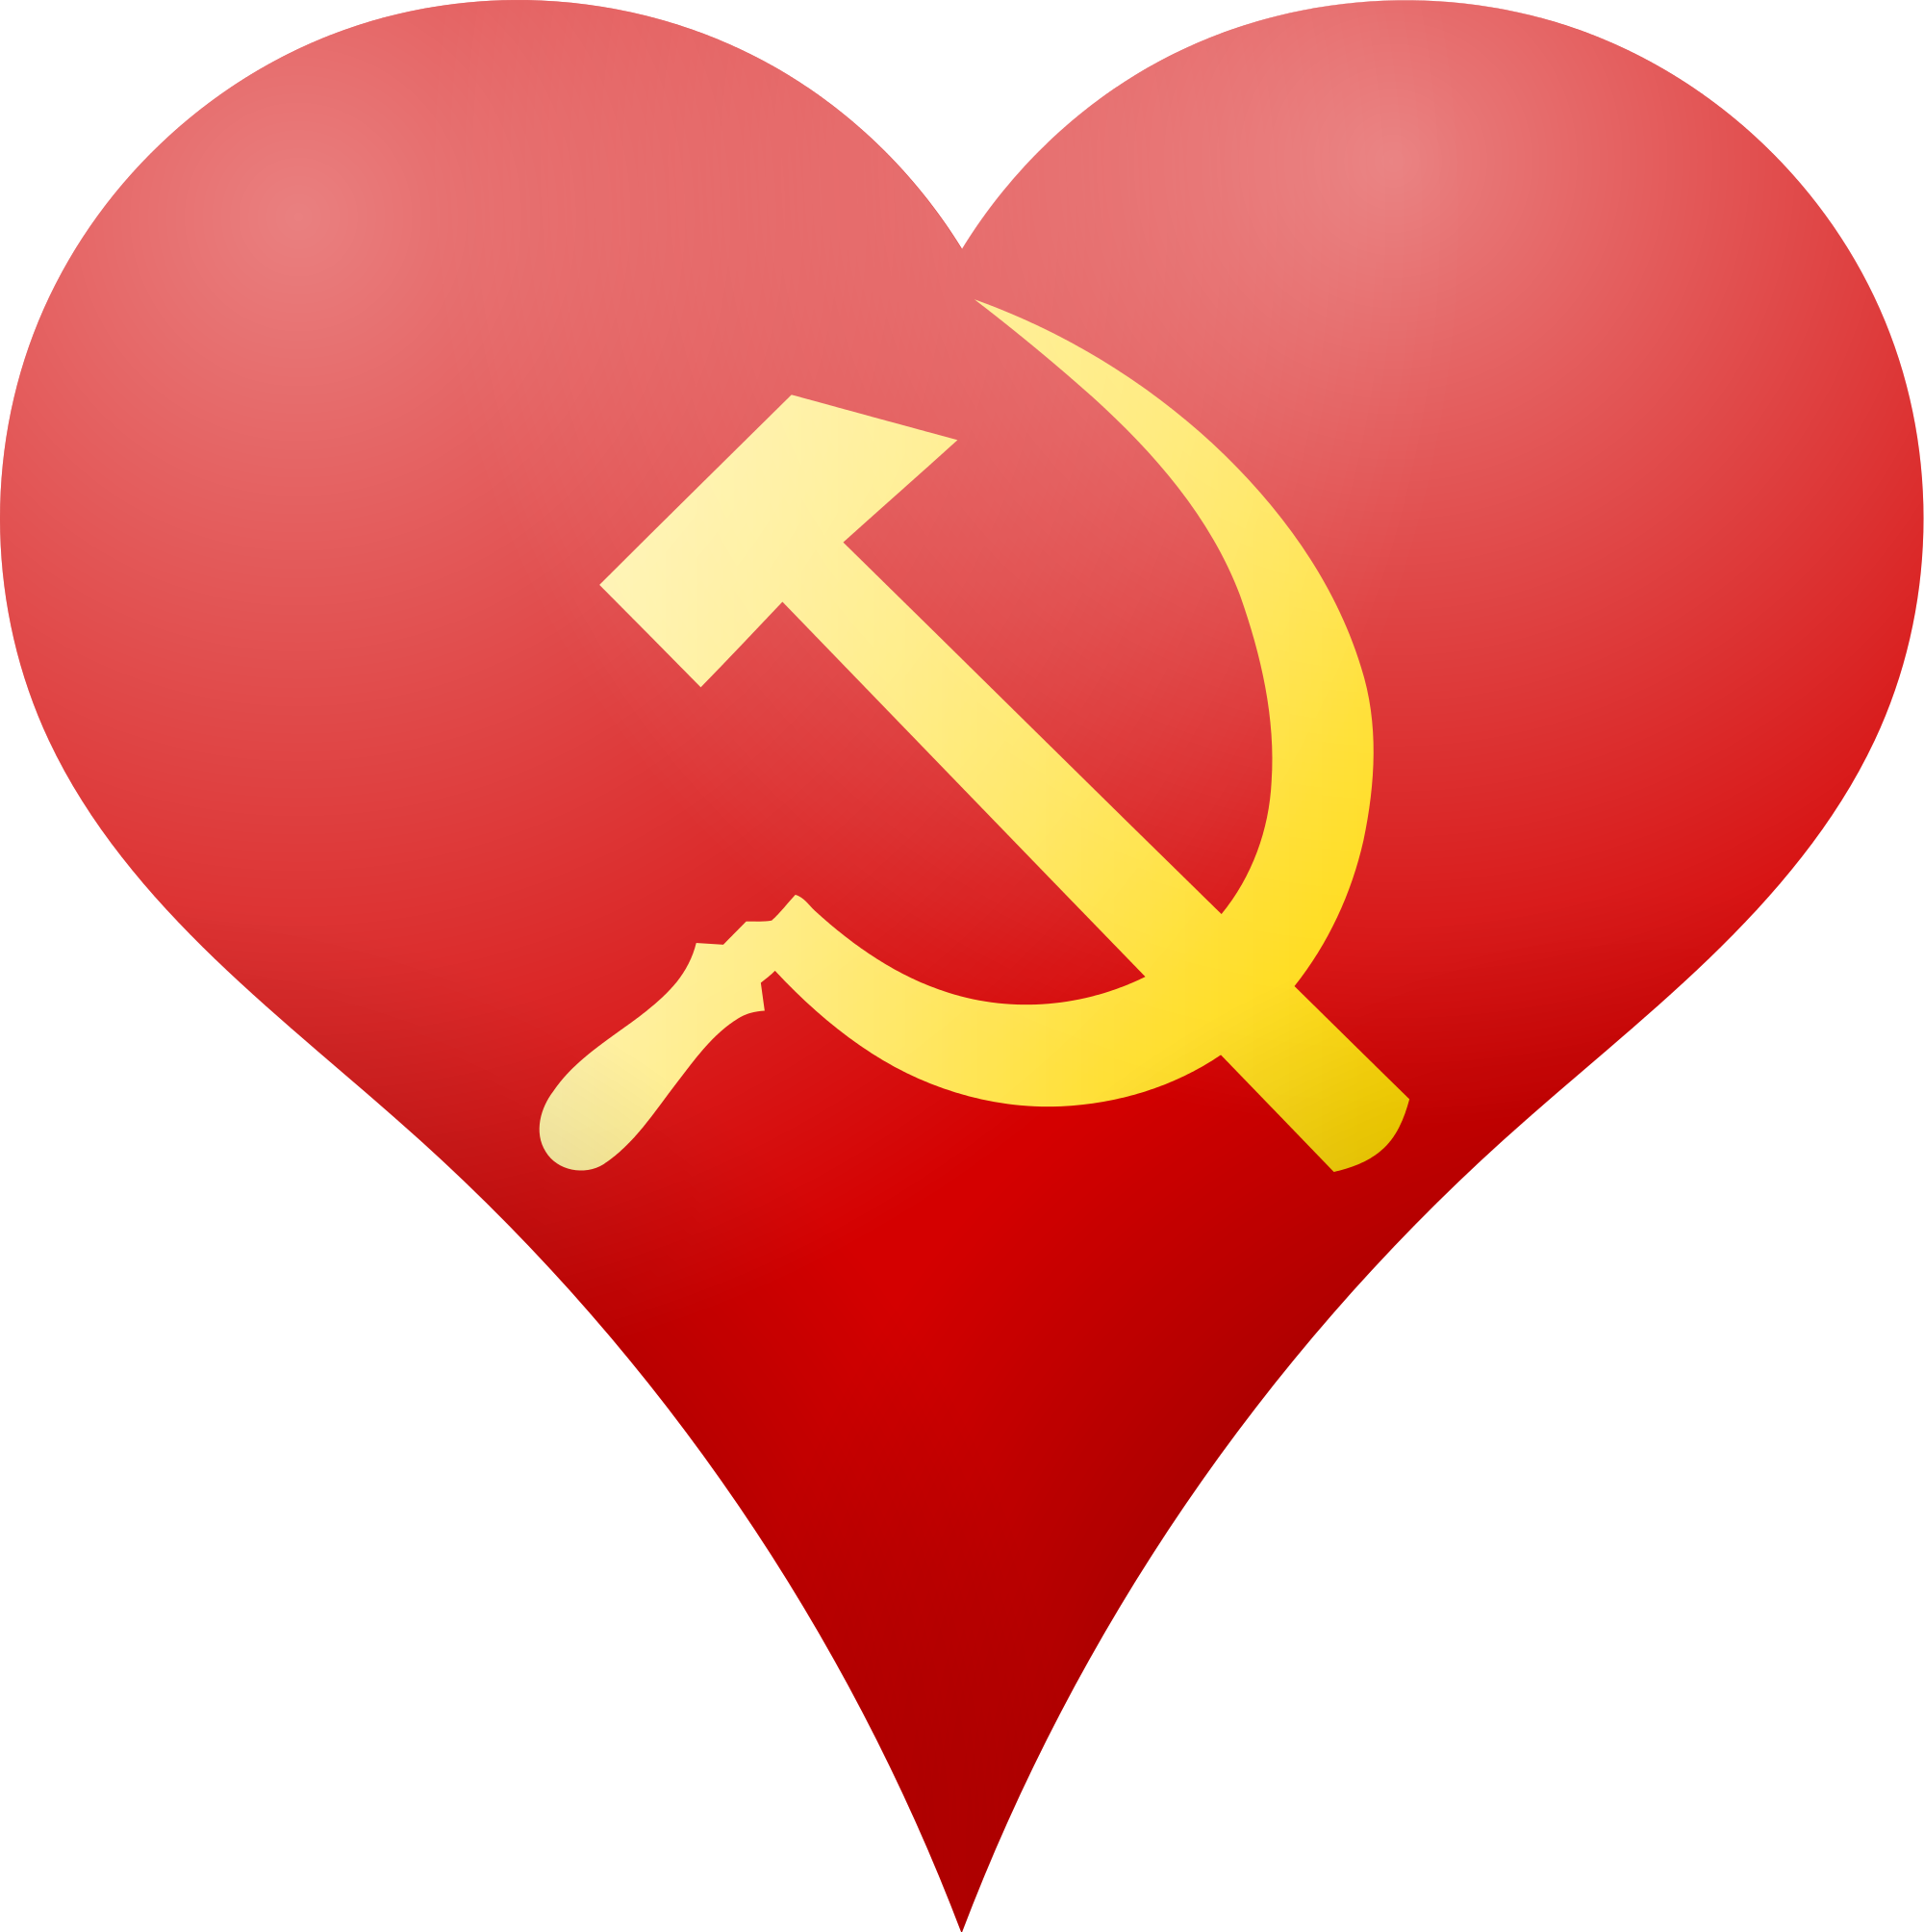 Open - Hammer And Sickle Heart (2000x2008)